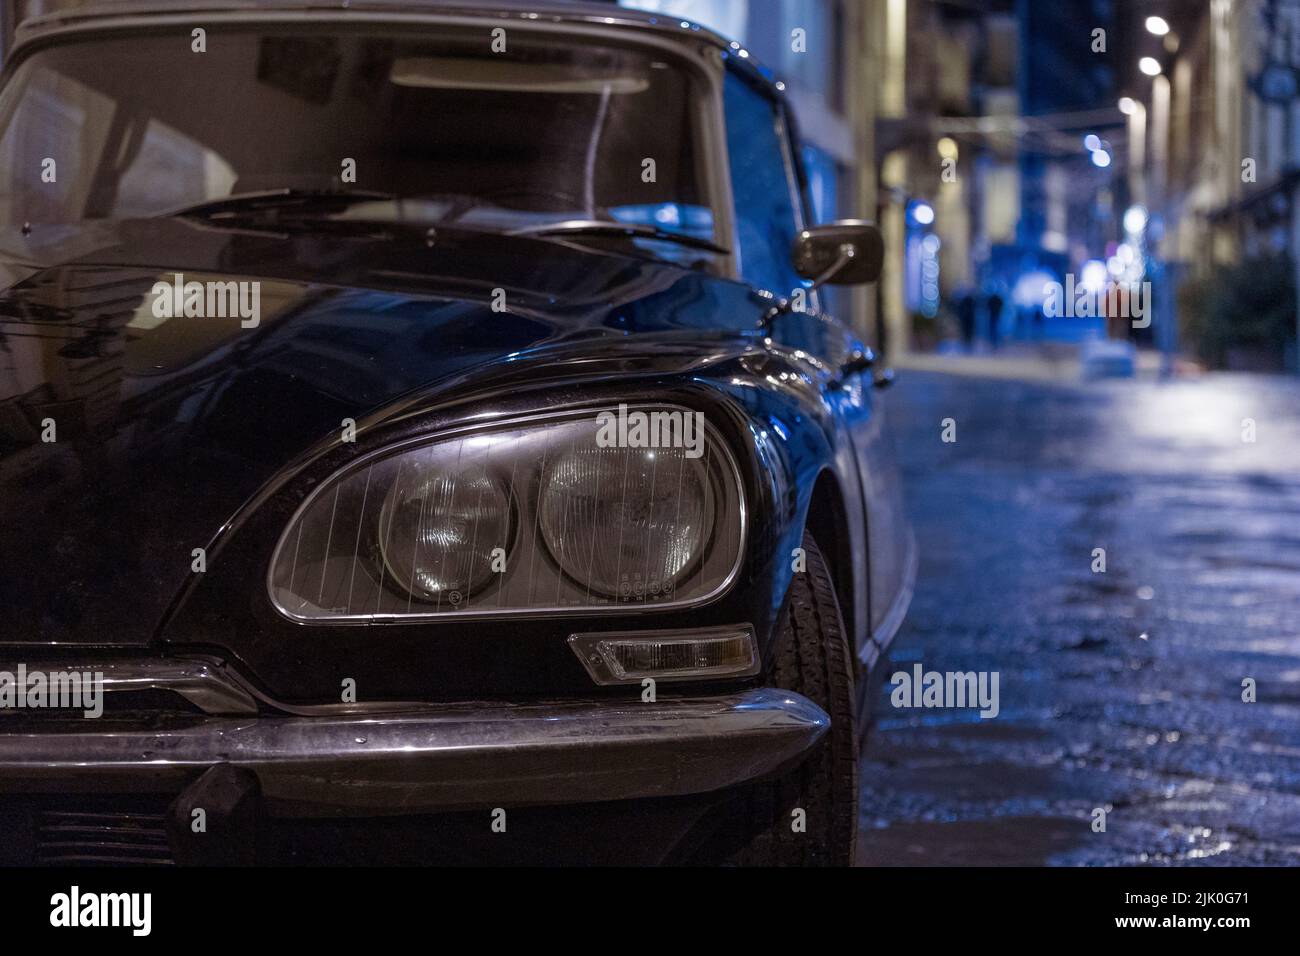 A front view shot of a Citroen Pallas car in the street at night Stock Photo